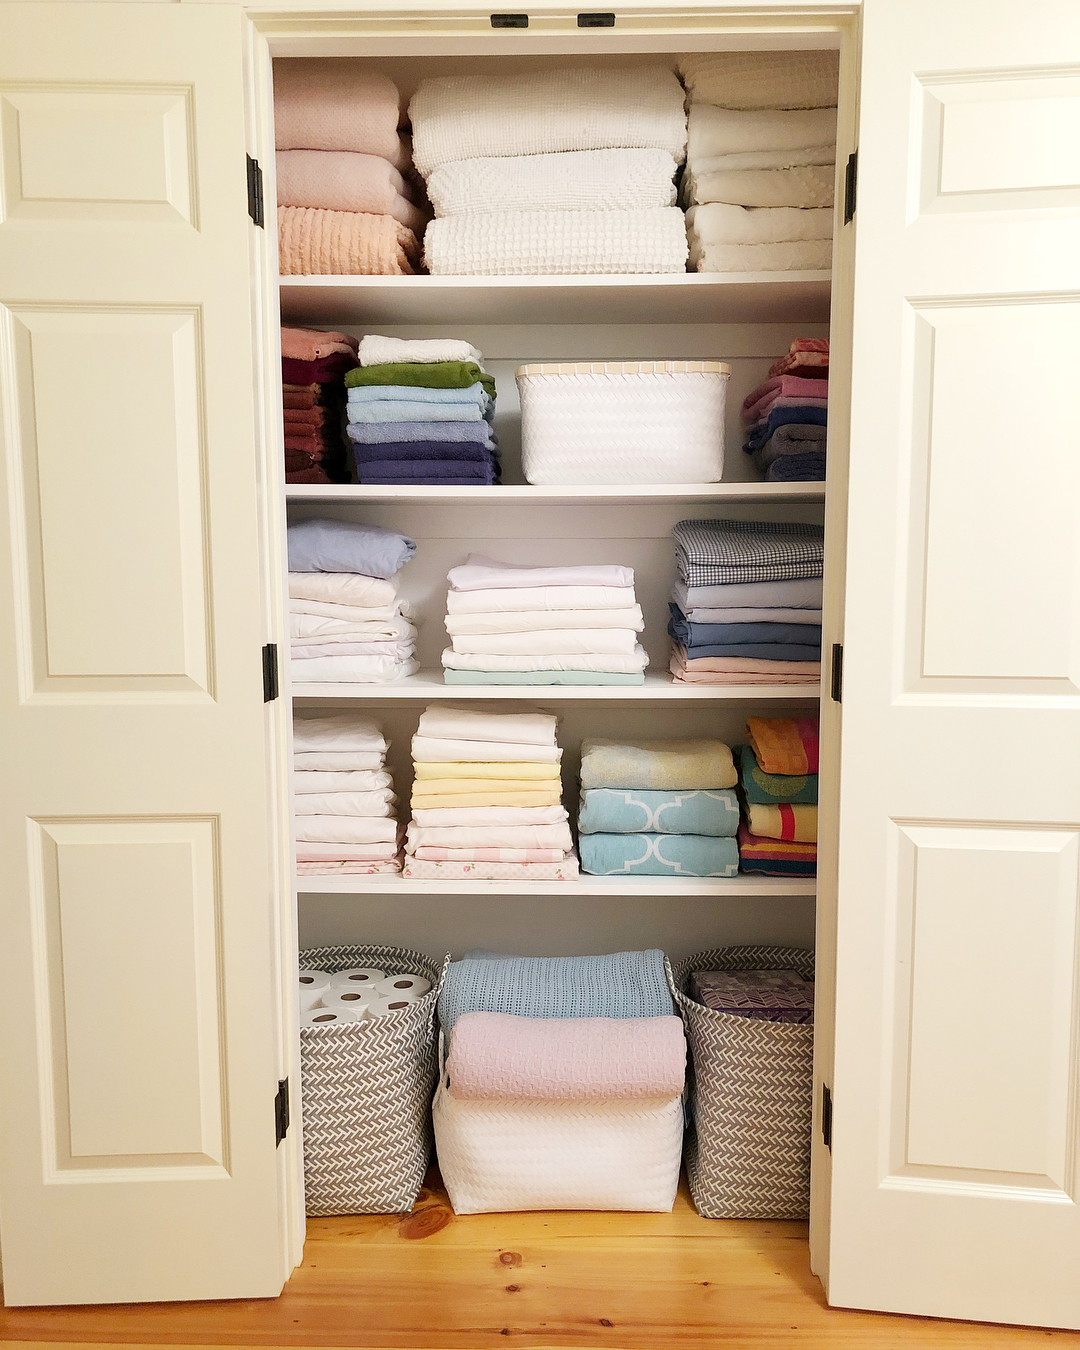 Finding Functional Storage Space In an Awkward Linen Closet - Yellow Brick  Home